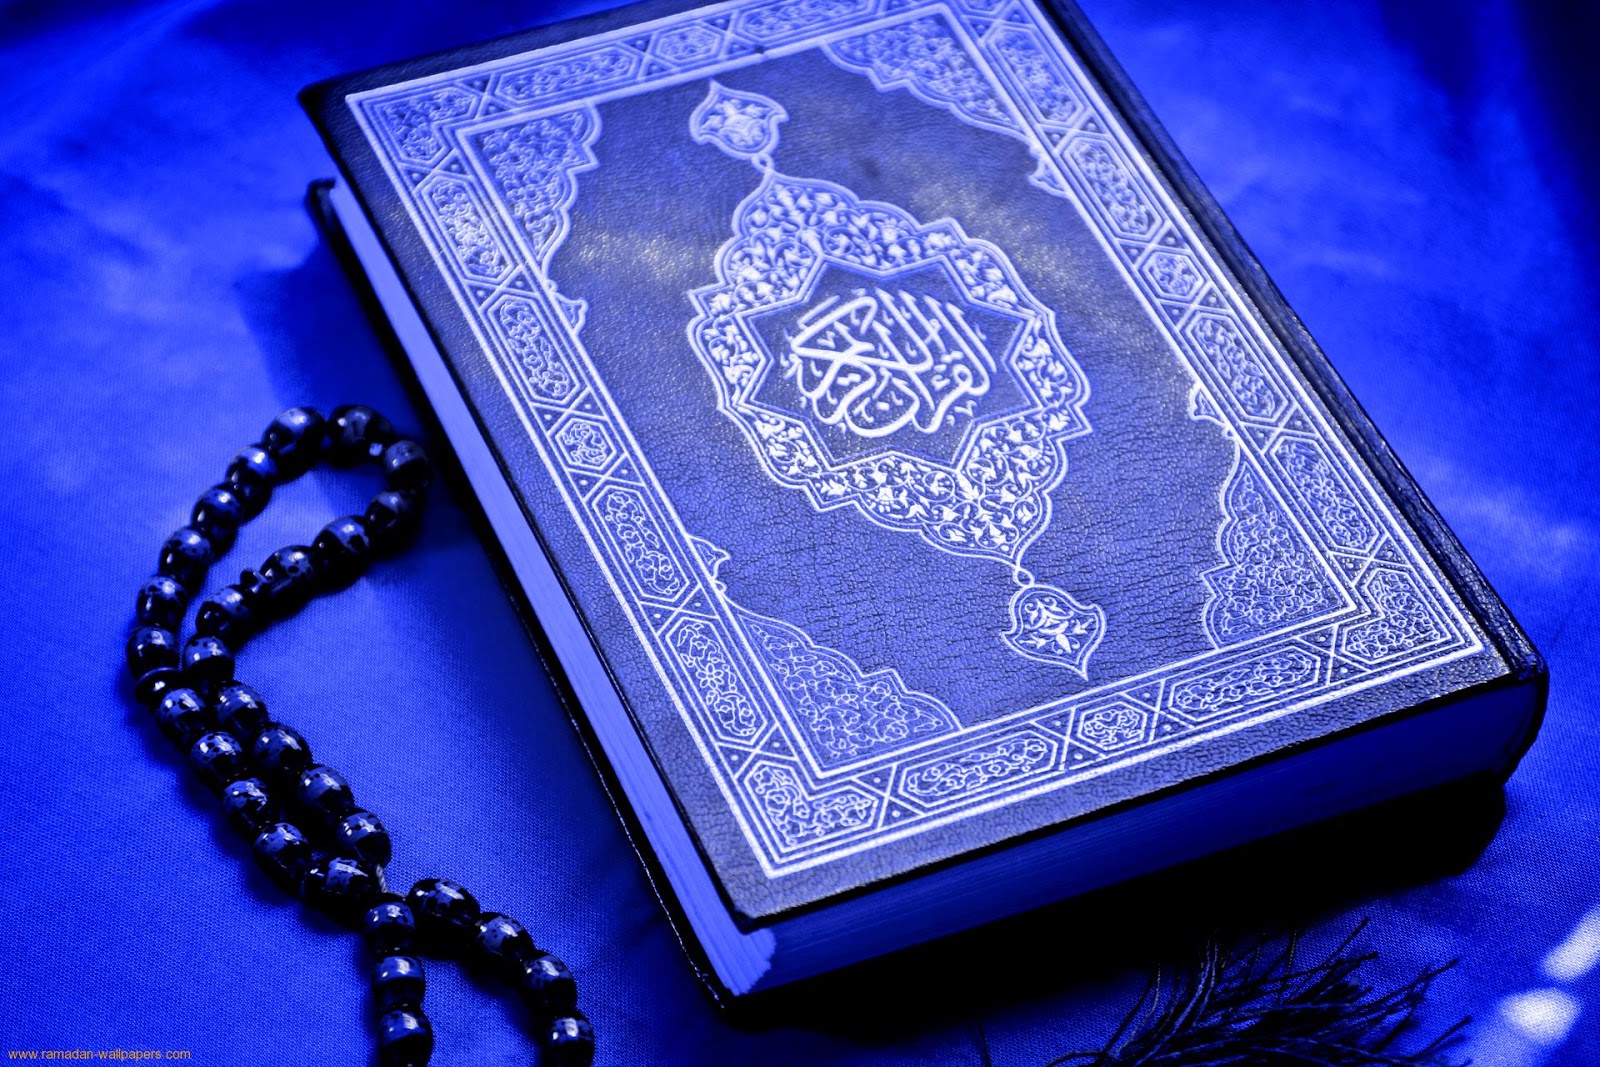 History OF The Holy Quran